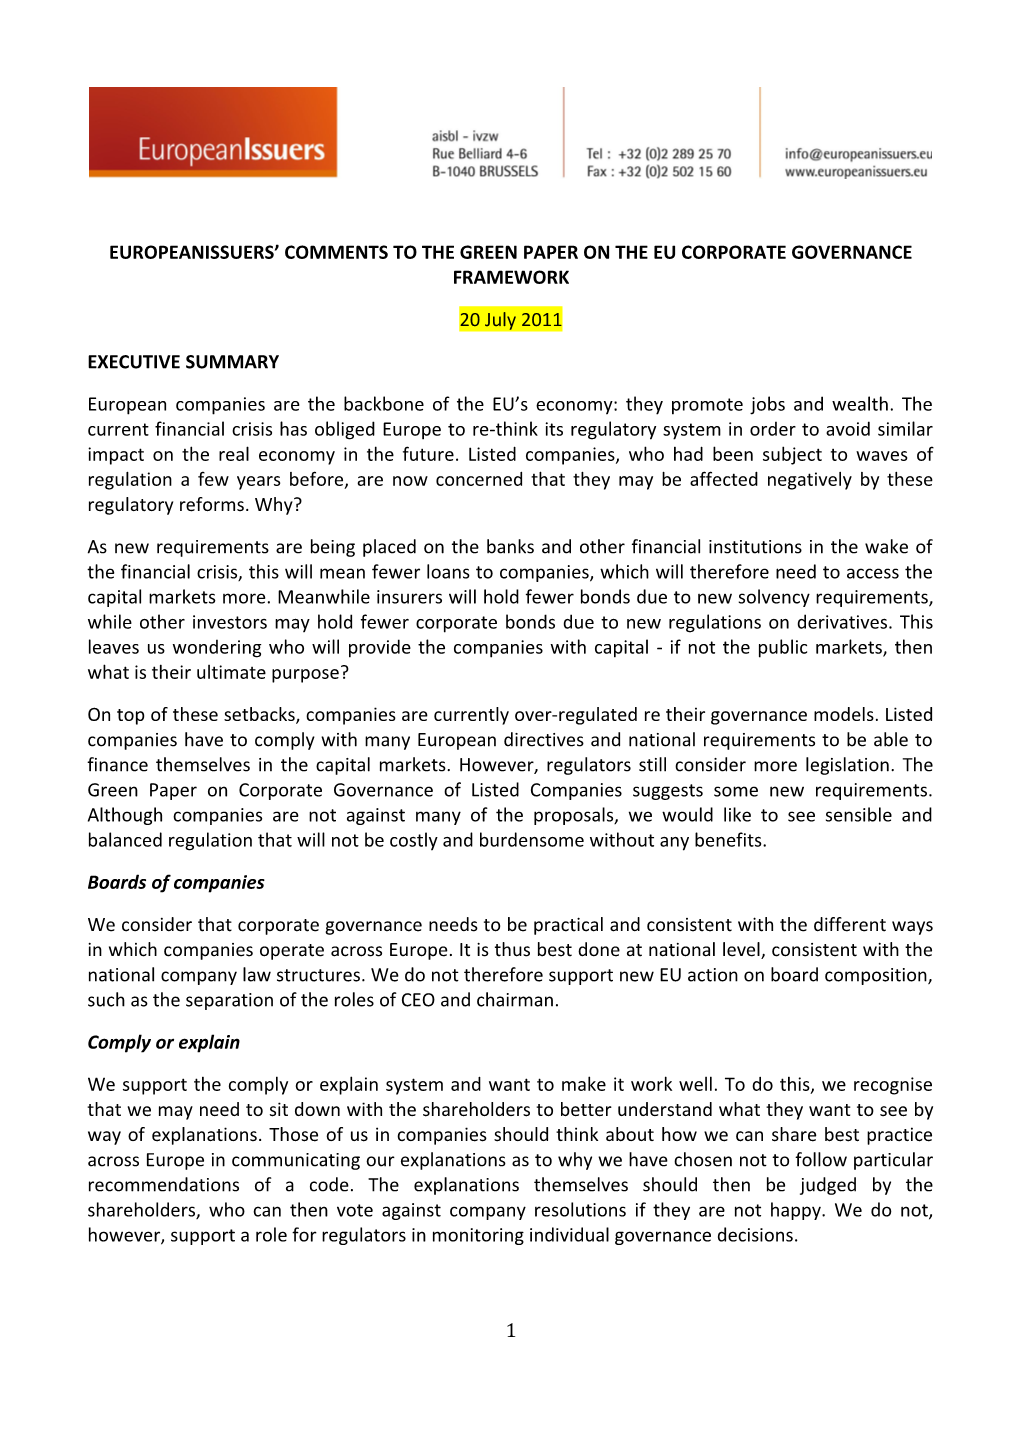 Europeanissuers Comments to the Green Paper on the Eu Corporate Governance Framework